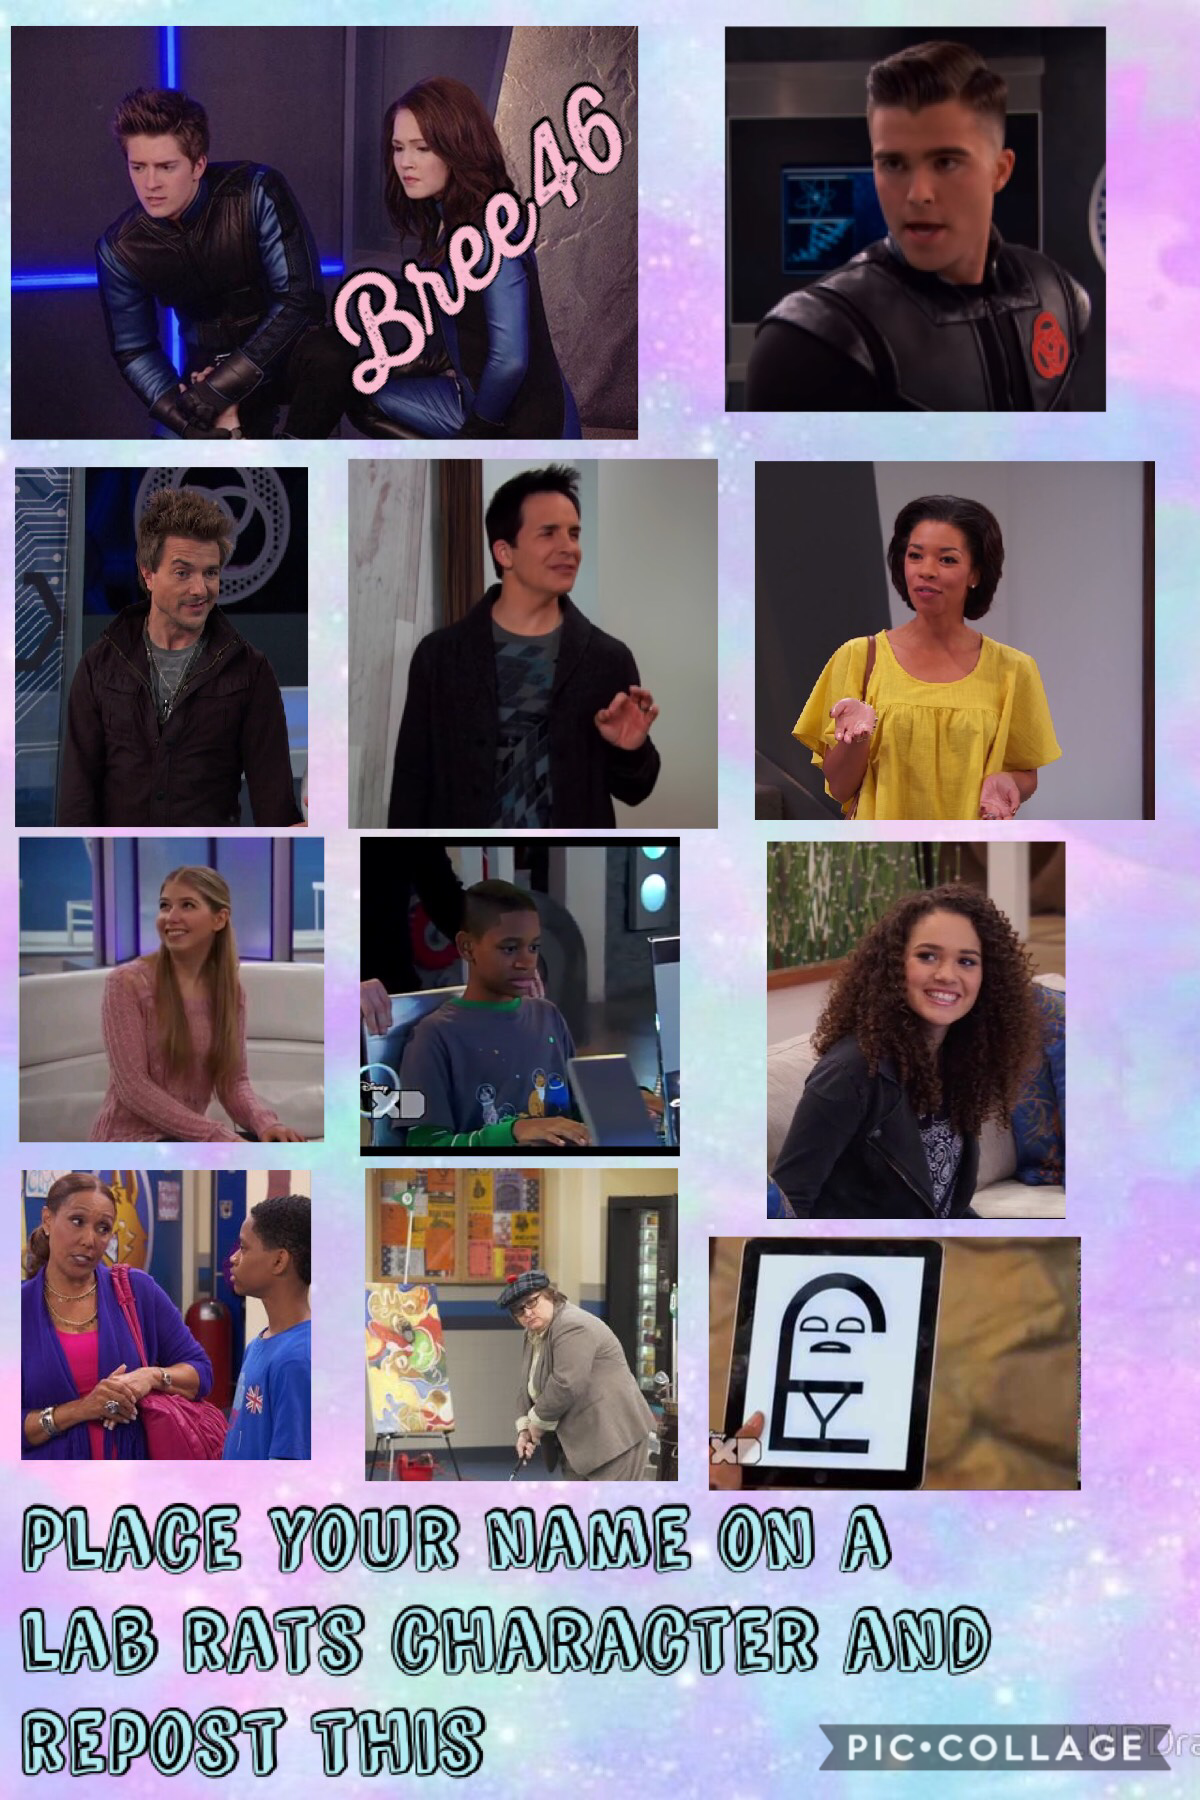 Place your name on a lab rats character and repost it